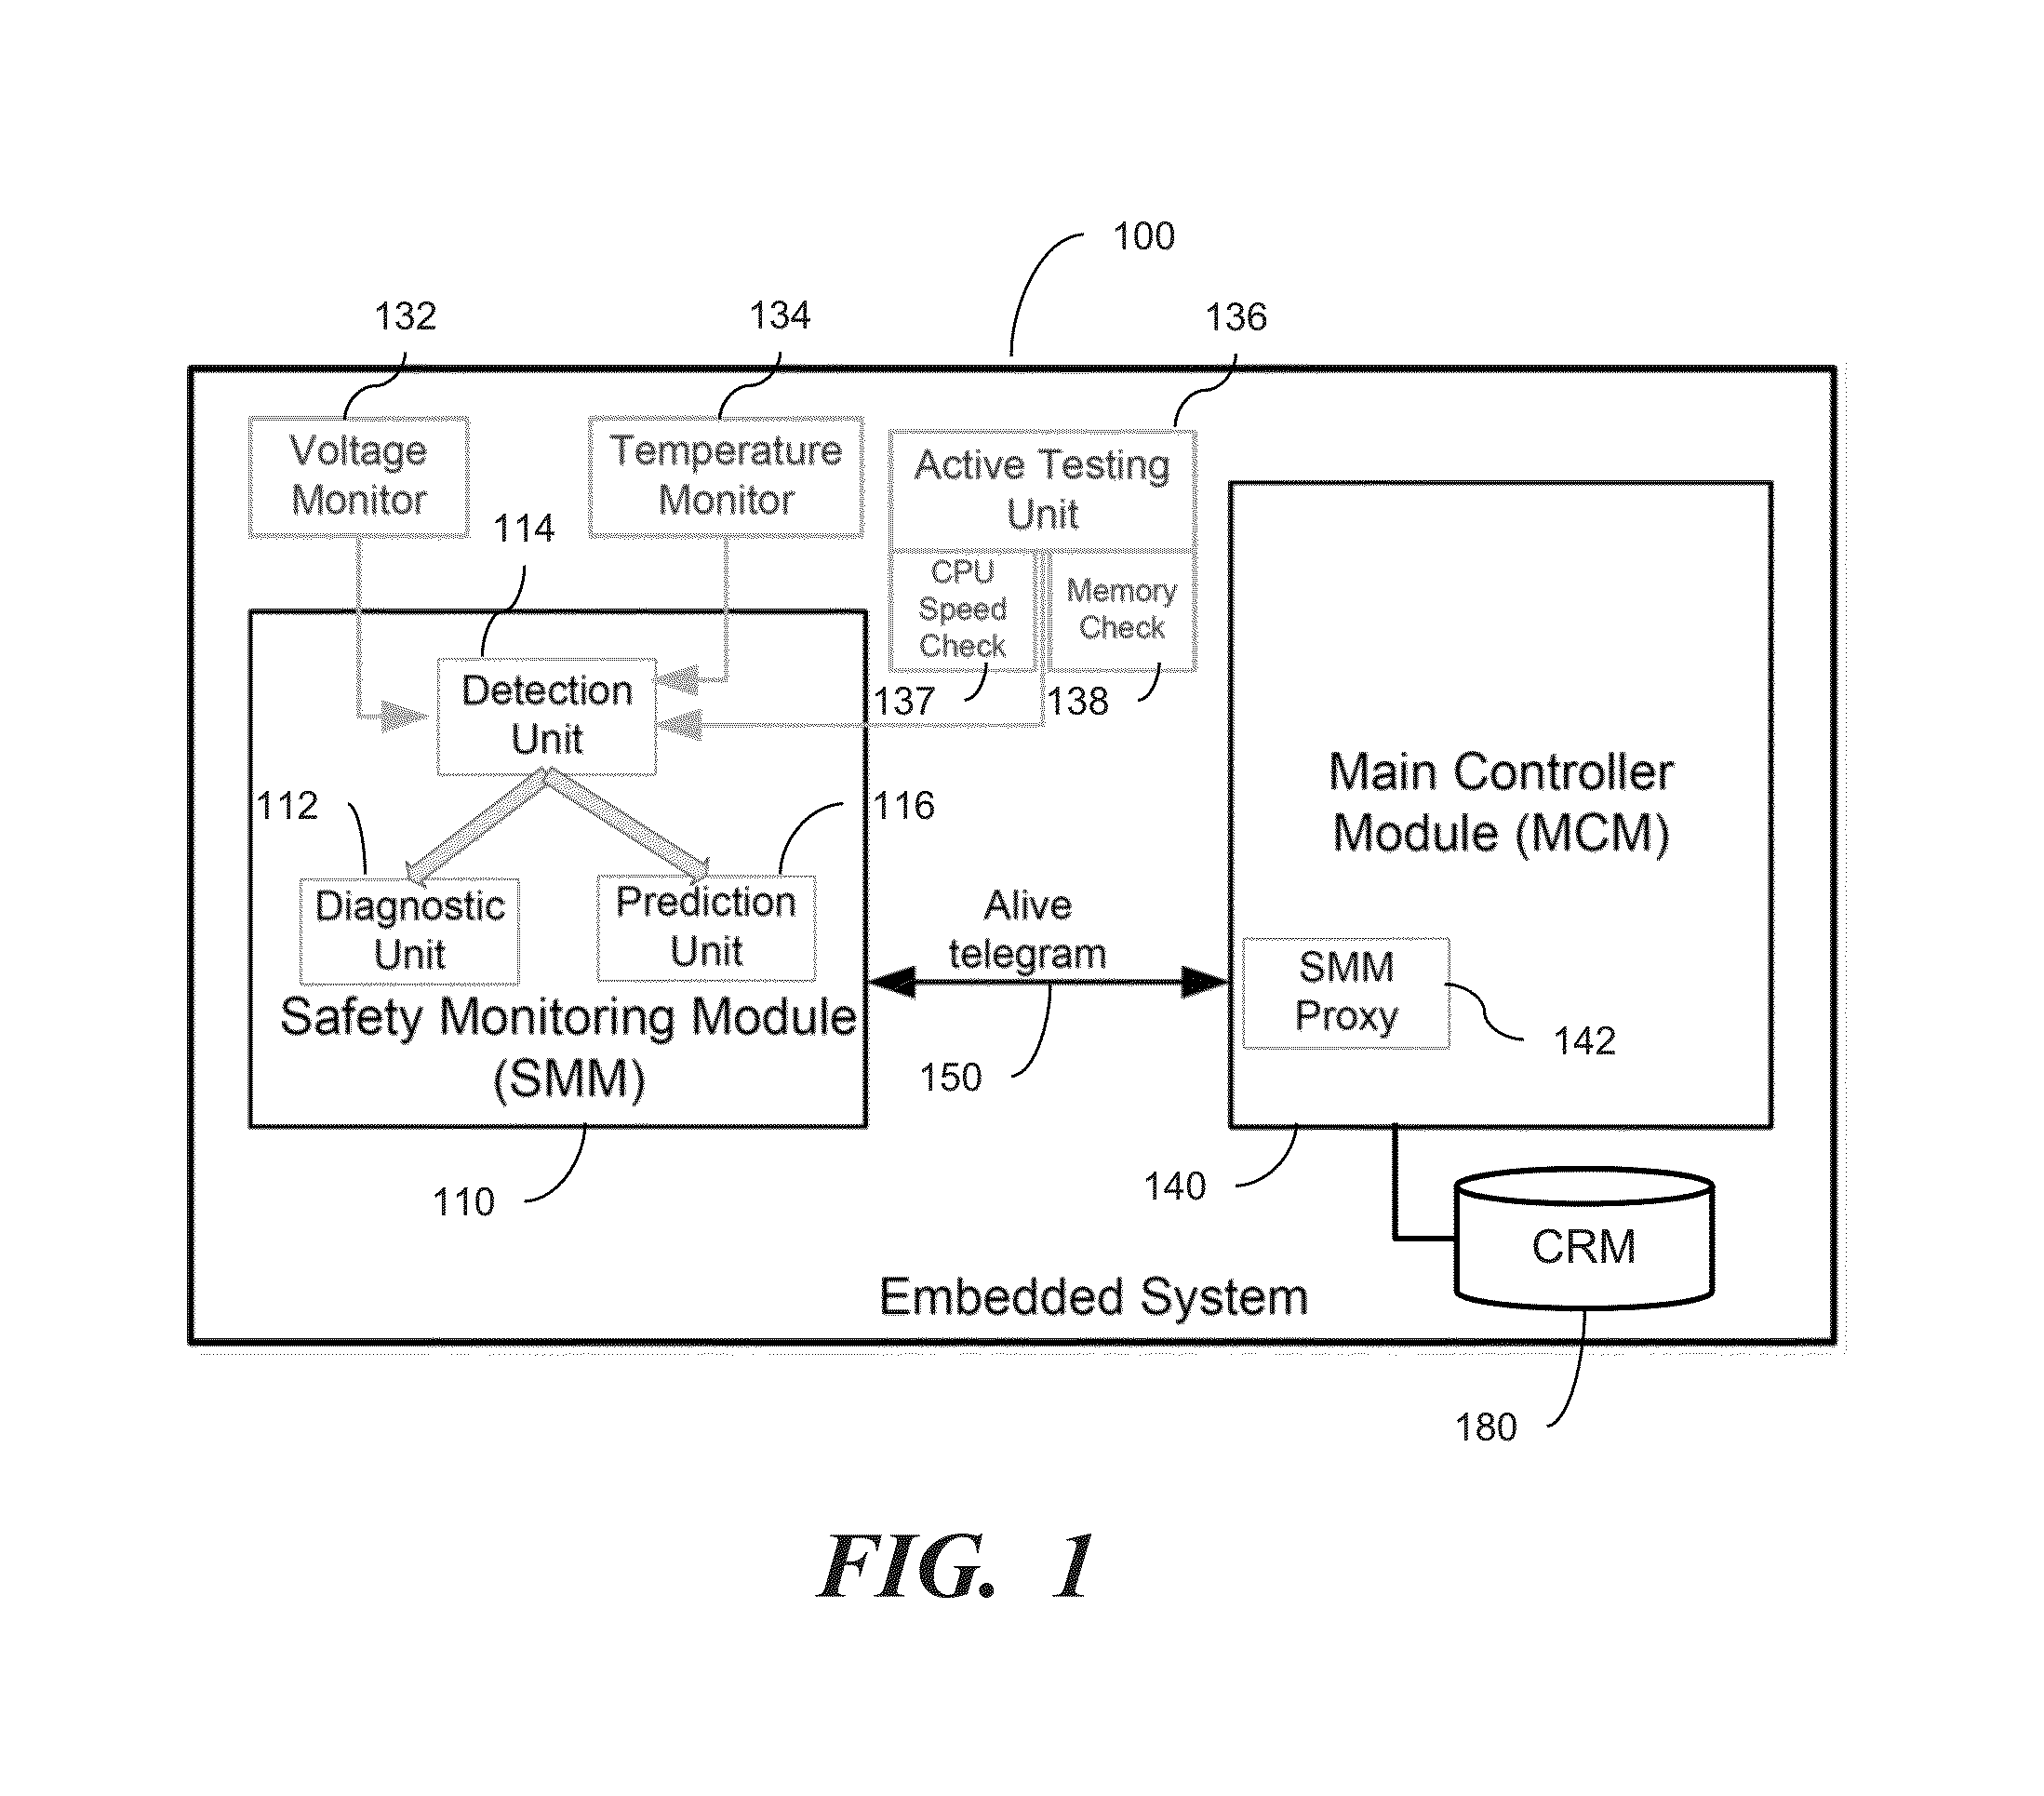 System and method of safety monitoring for embedded systems